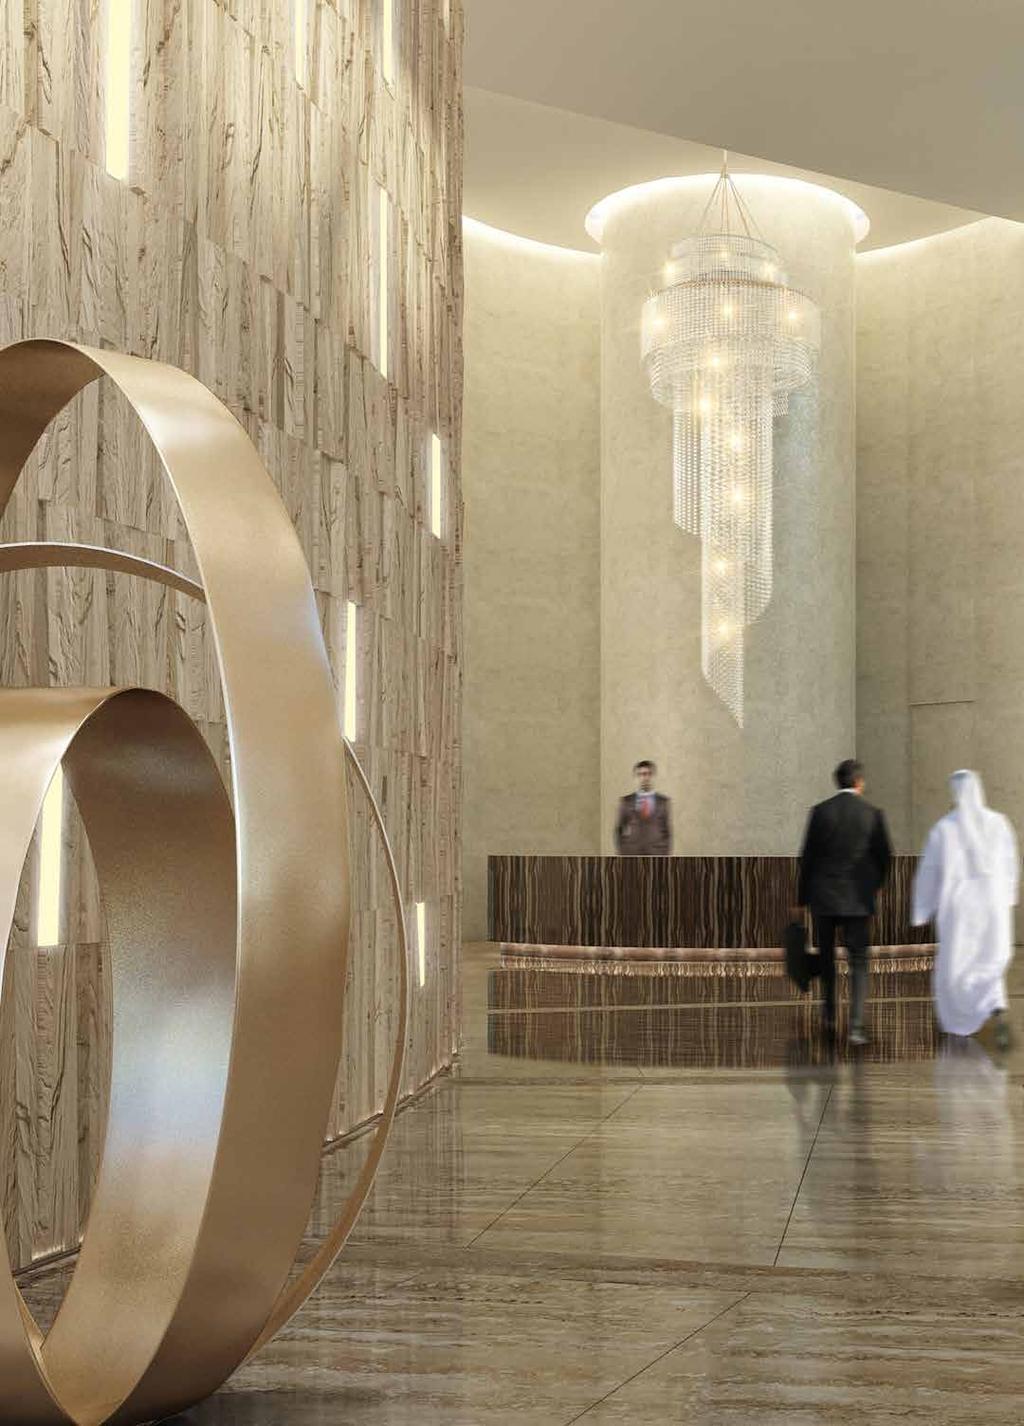 9M AN IMPRESSIVE TONE FOR YOUR BUSINESS... A REAL SENSE OF ARRIVAL The dedicated entrance @ United Tower presents a magnificent triple-height lobby in steel, glass and marble.